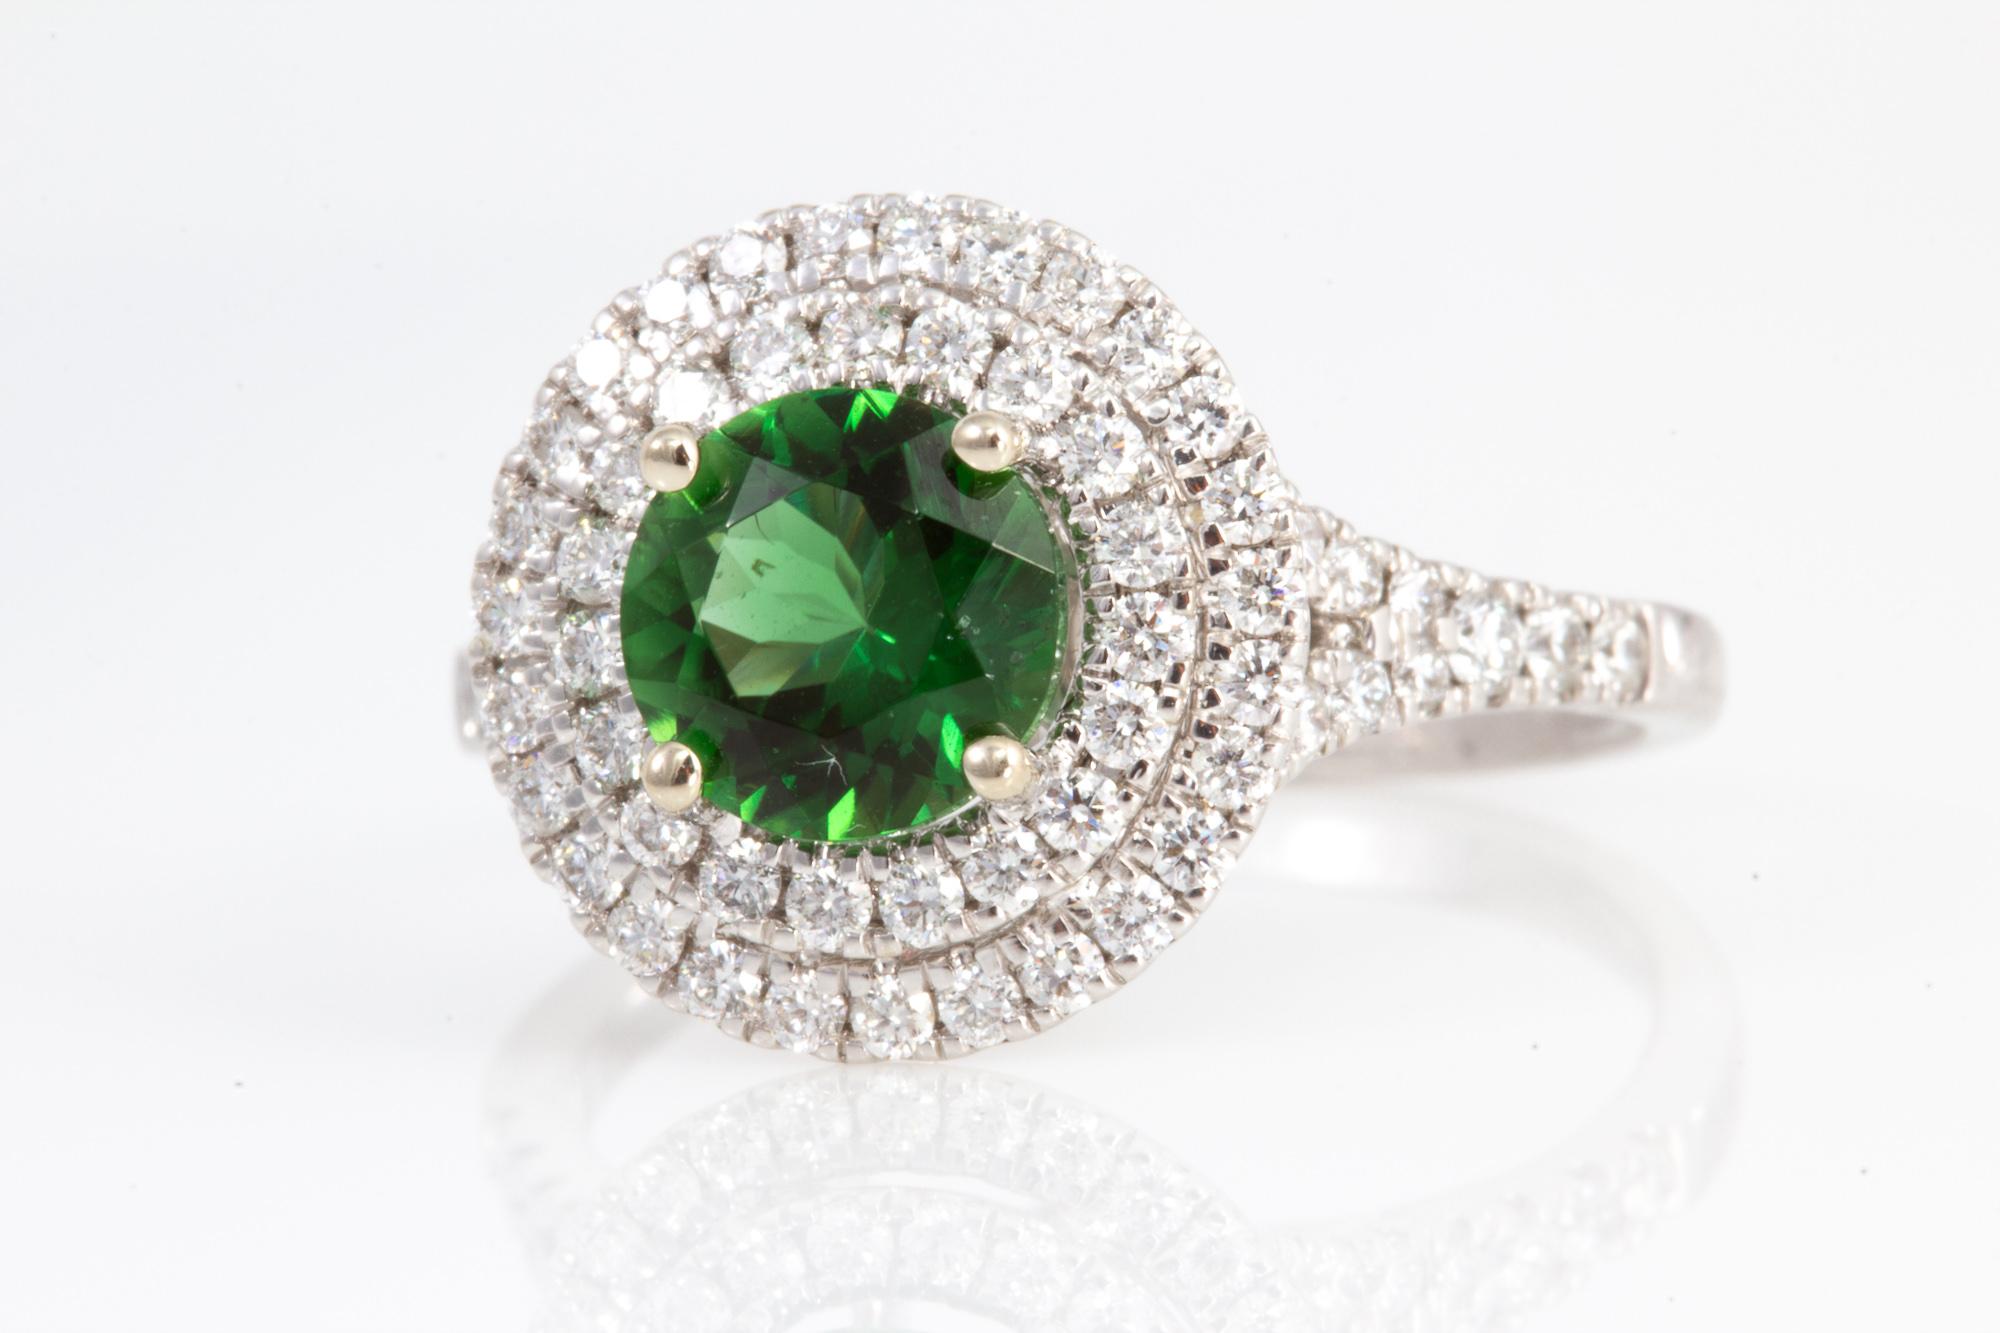 Exceptionally Well Cut 1.26 Carat Chrome Tourmaline and Diamond Ring 3